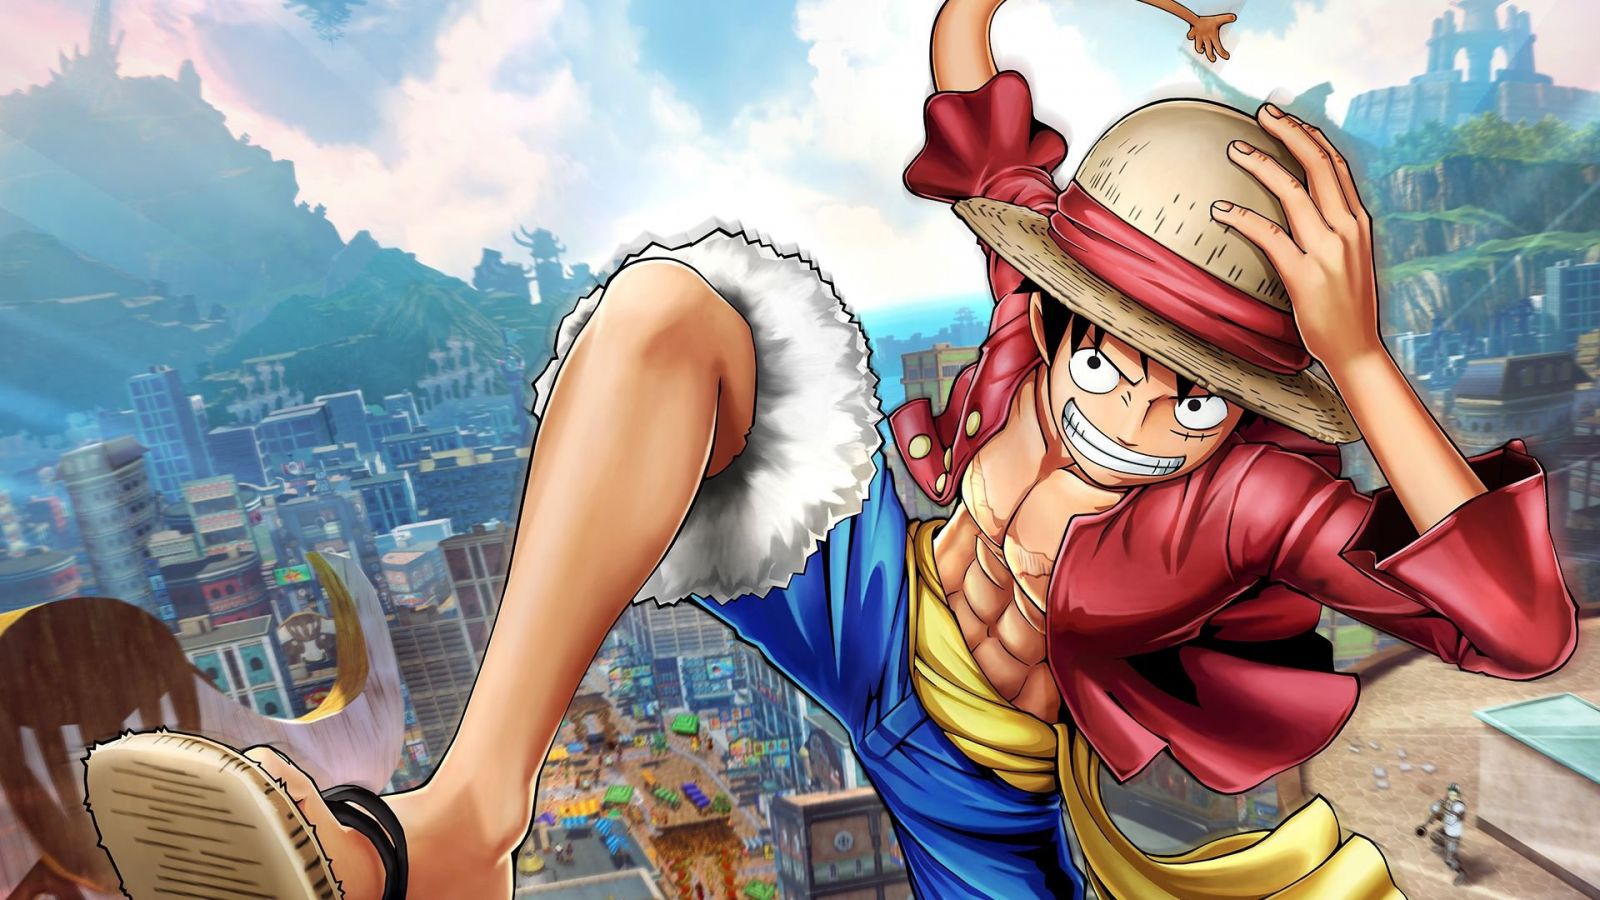 anh one piece lam nen may tinh 5 jpg